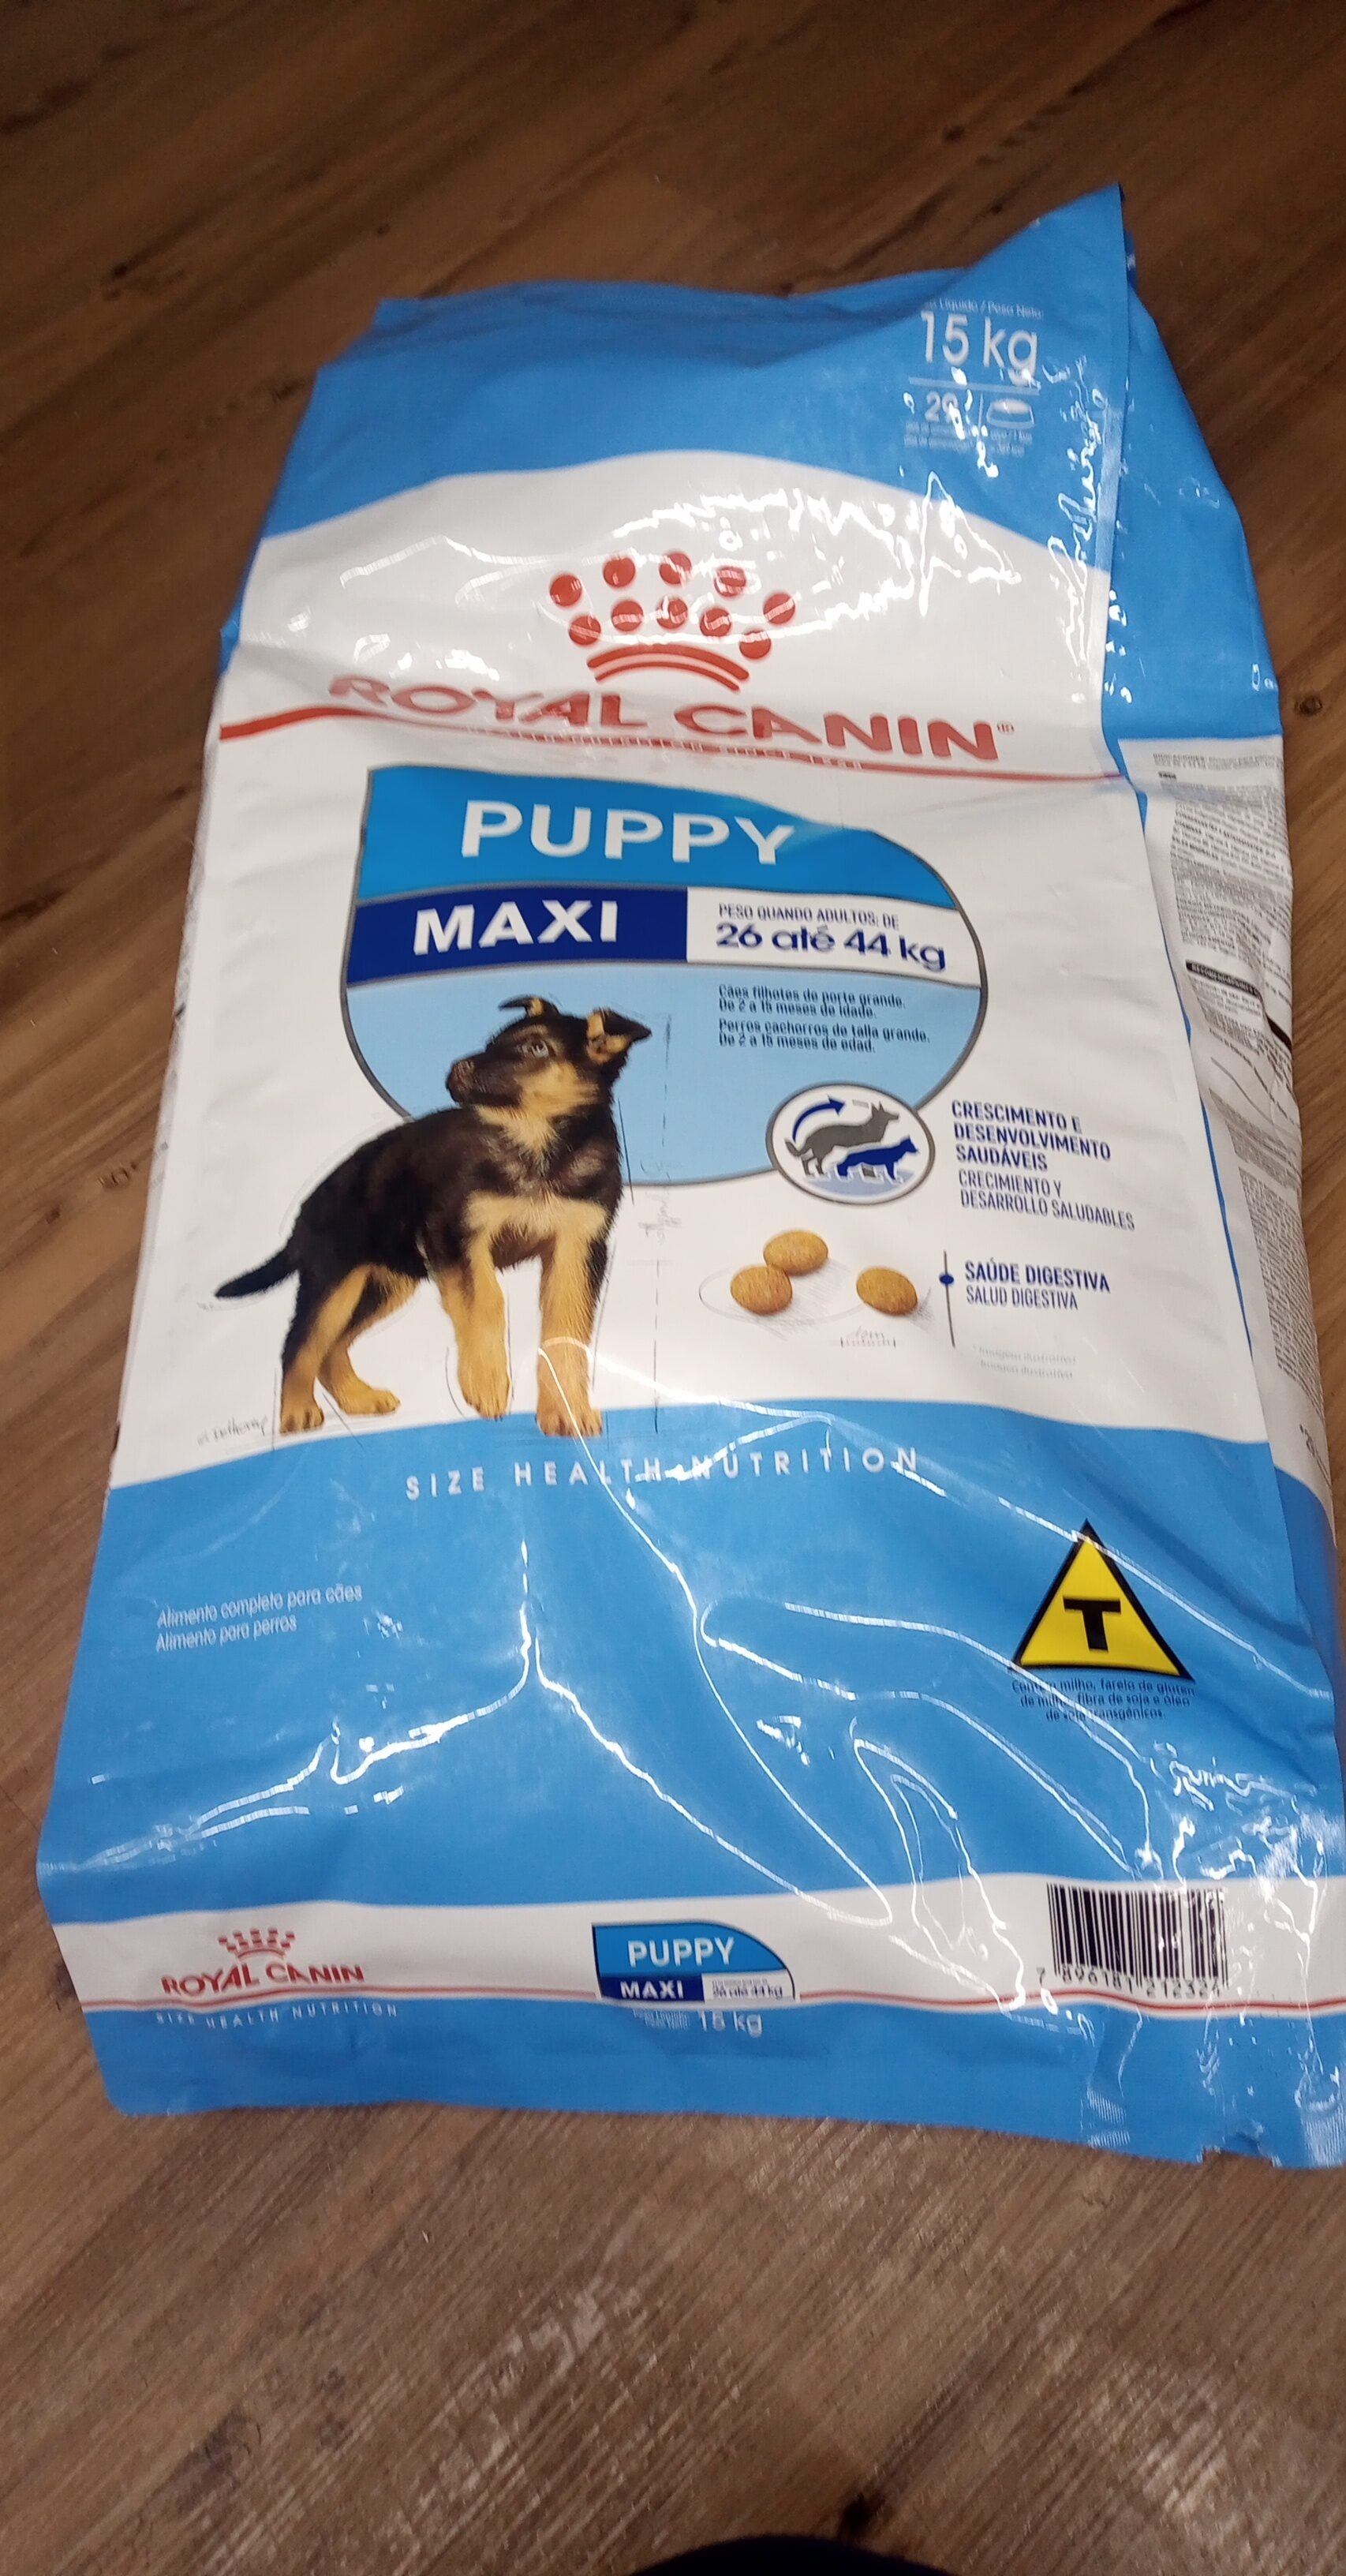 Royal canin puppy - Product - pt